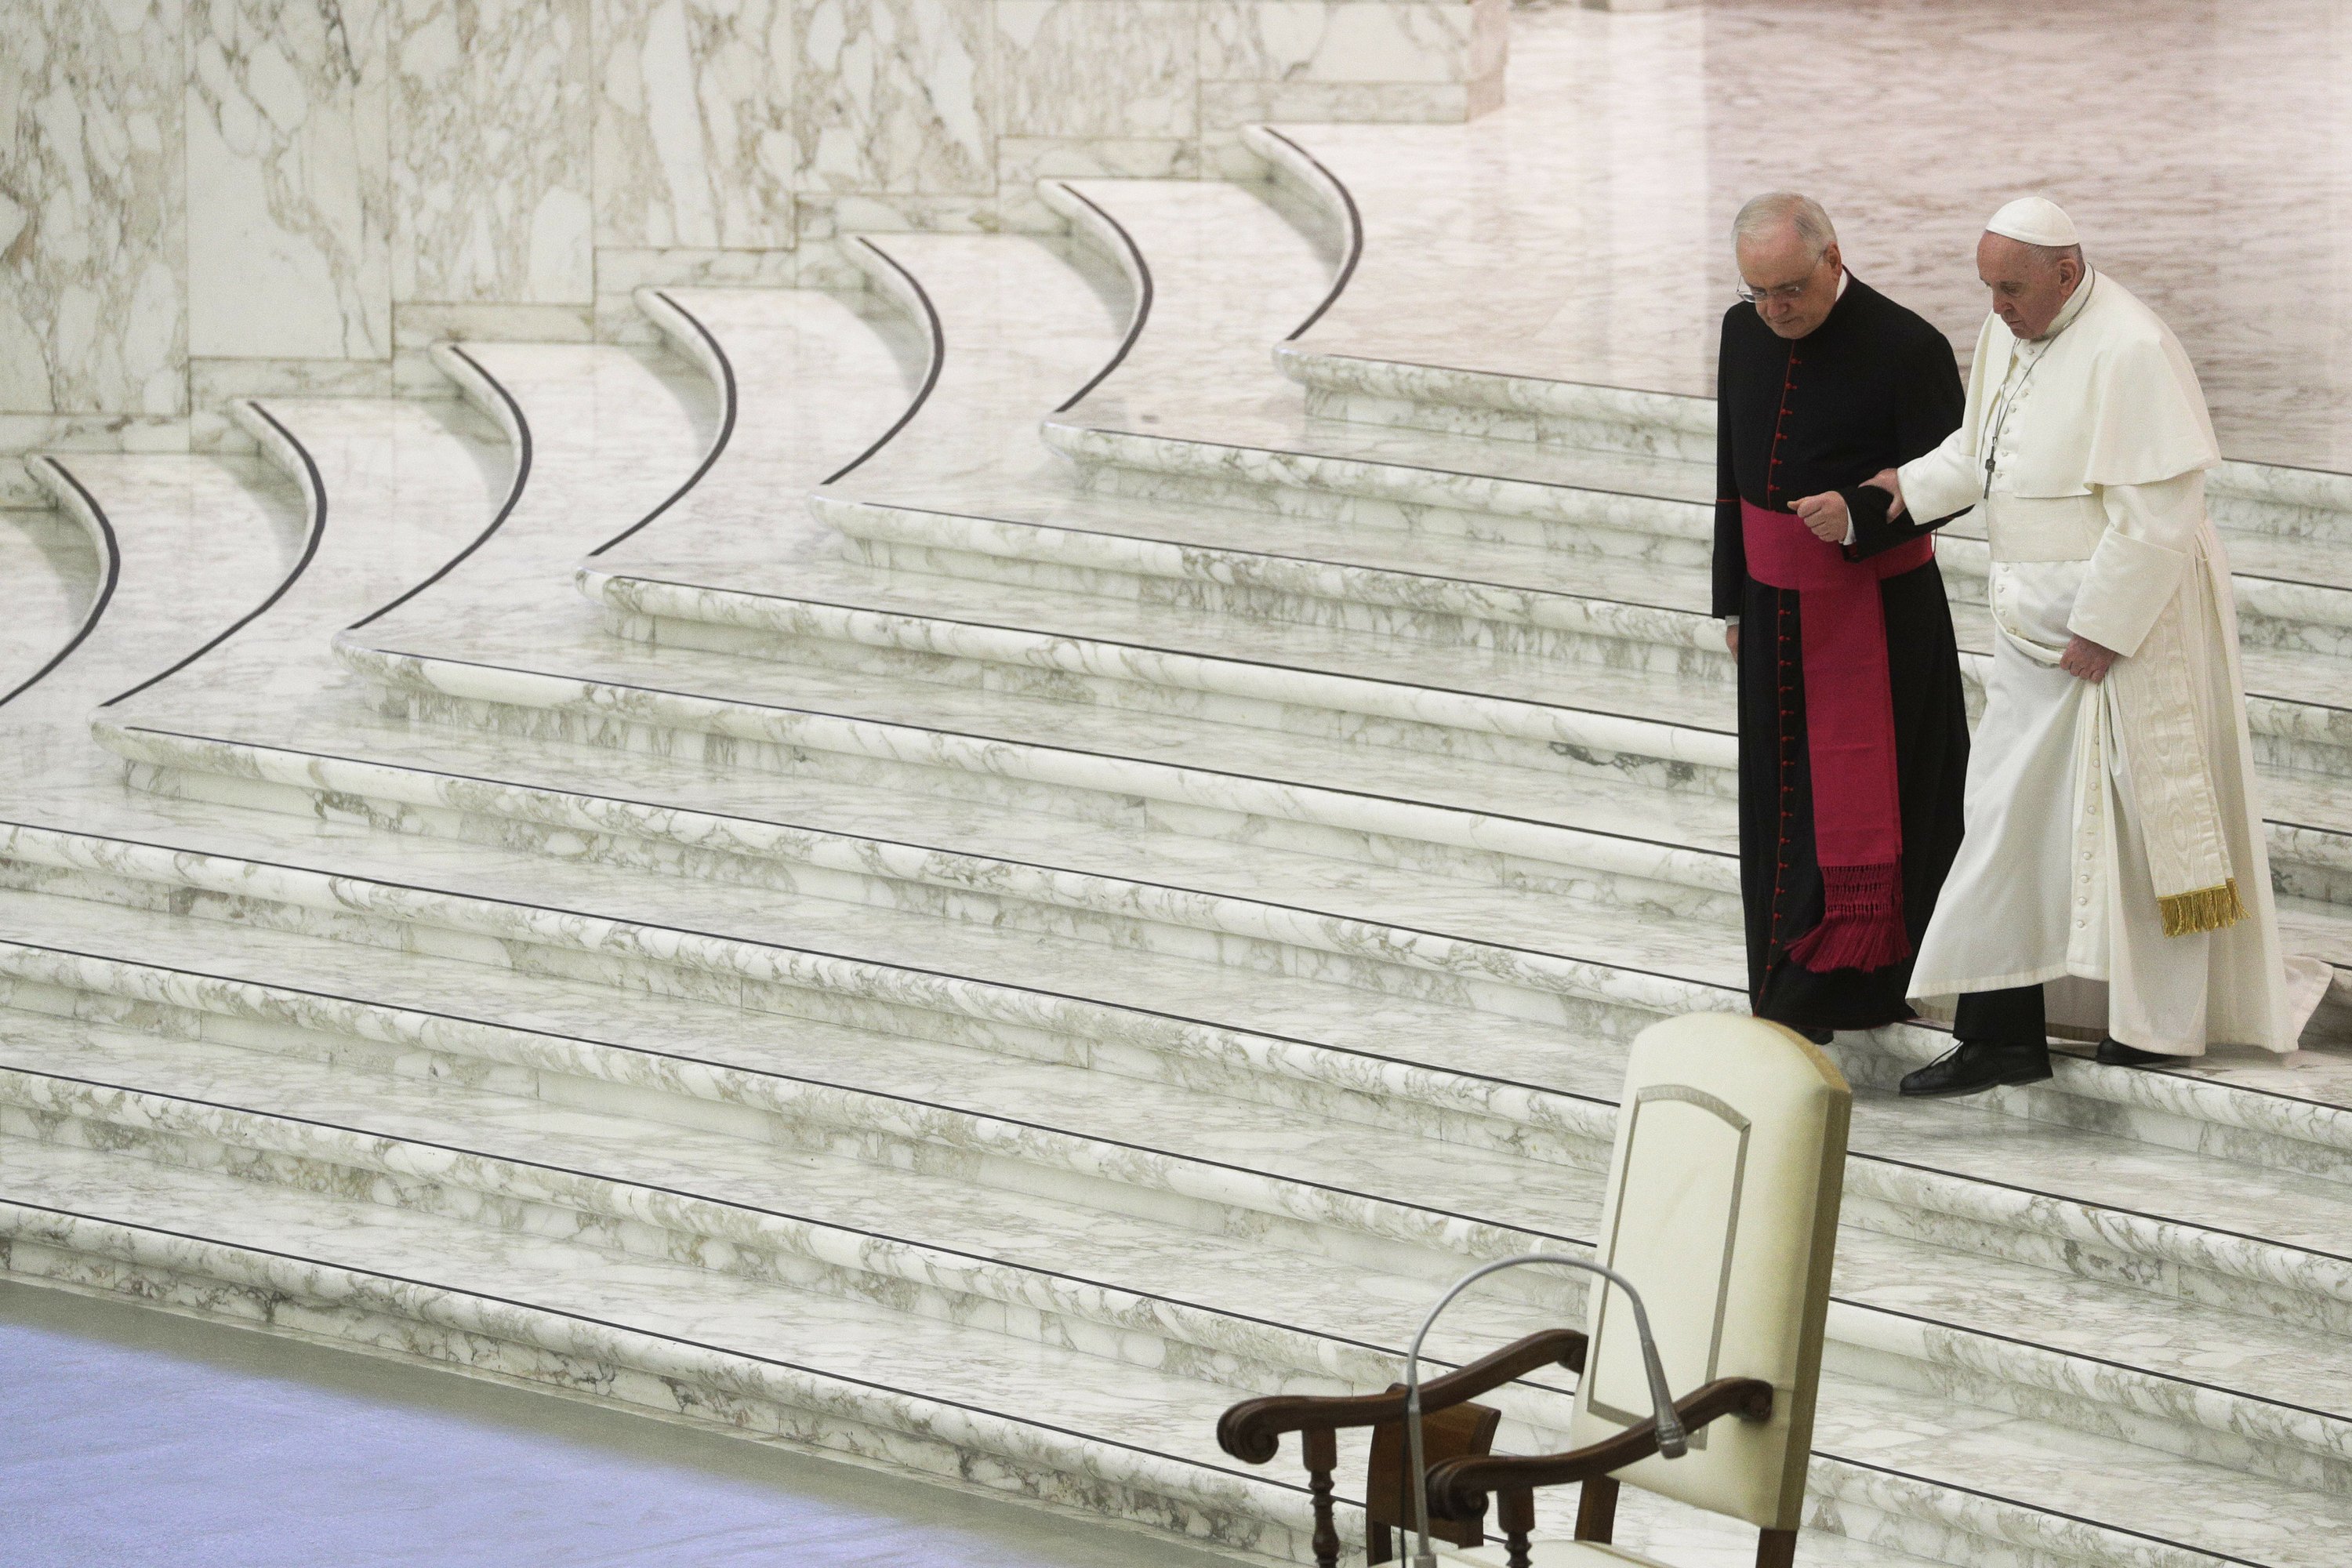 Back pain causes pope to skip Vatican New Year's ceremonies - Associated Press